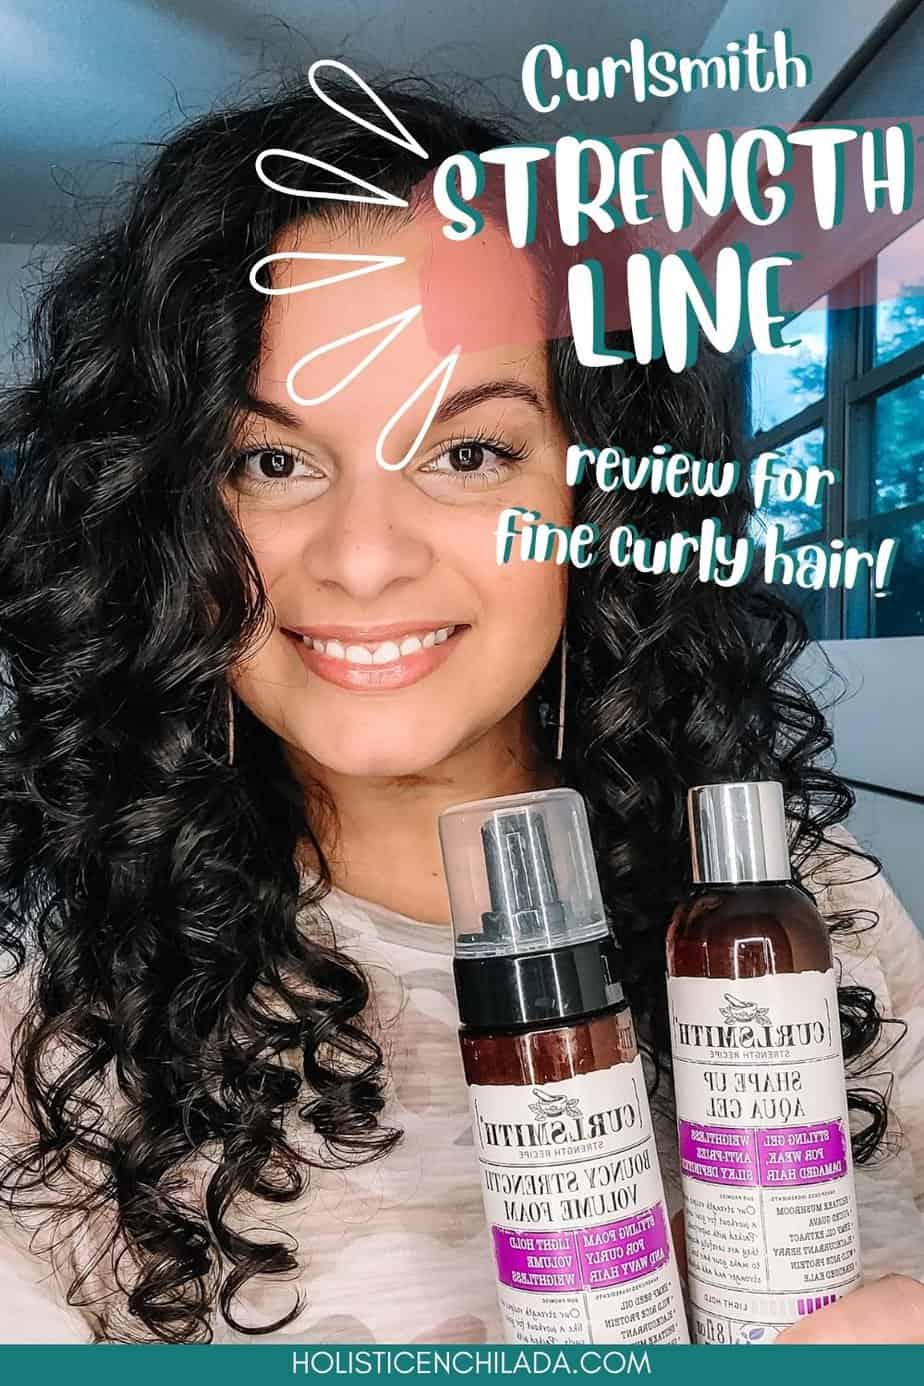 Curlsmith Strength Line Review For Fine Curly Hair The Holistic Enchilada 